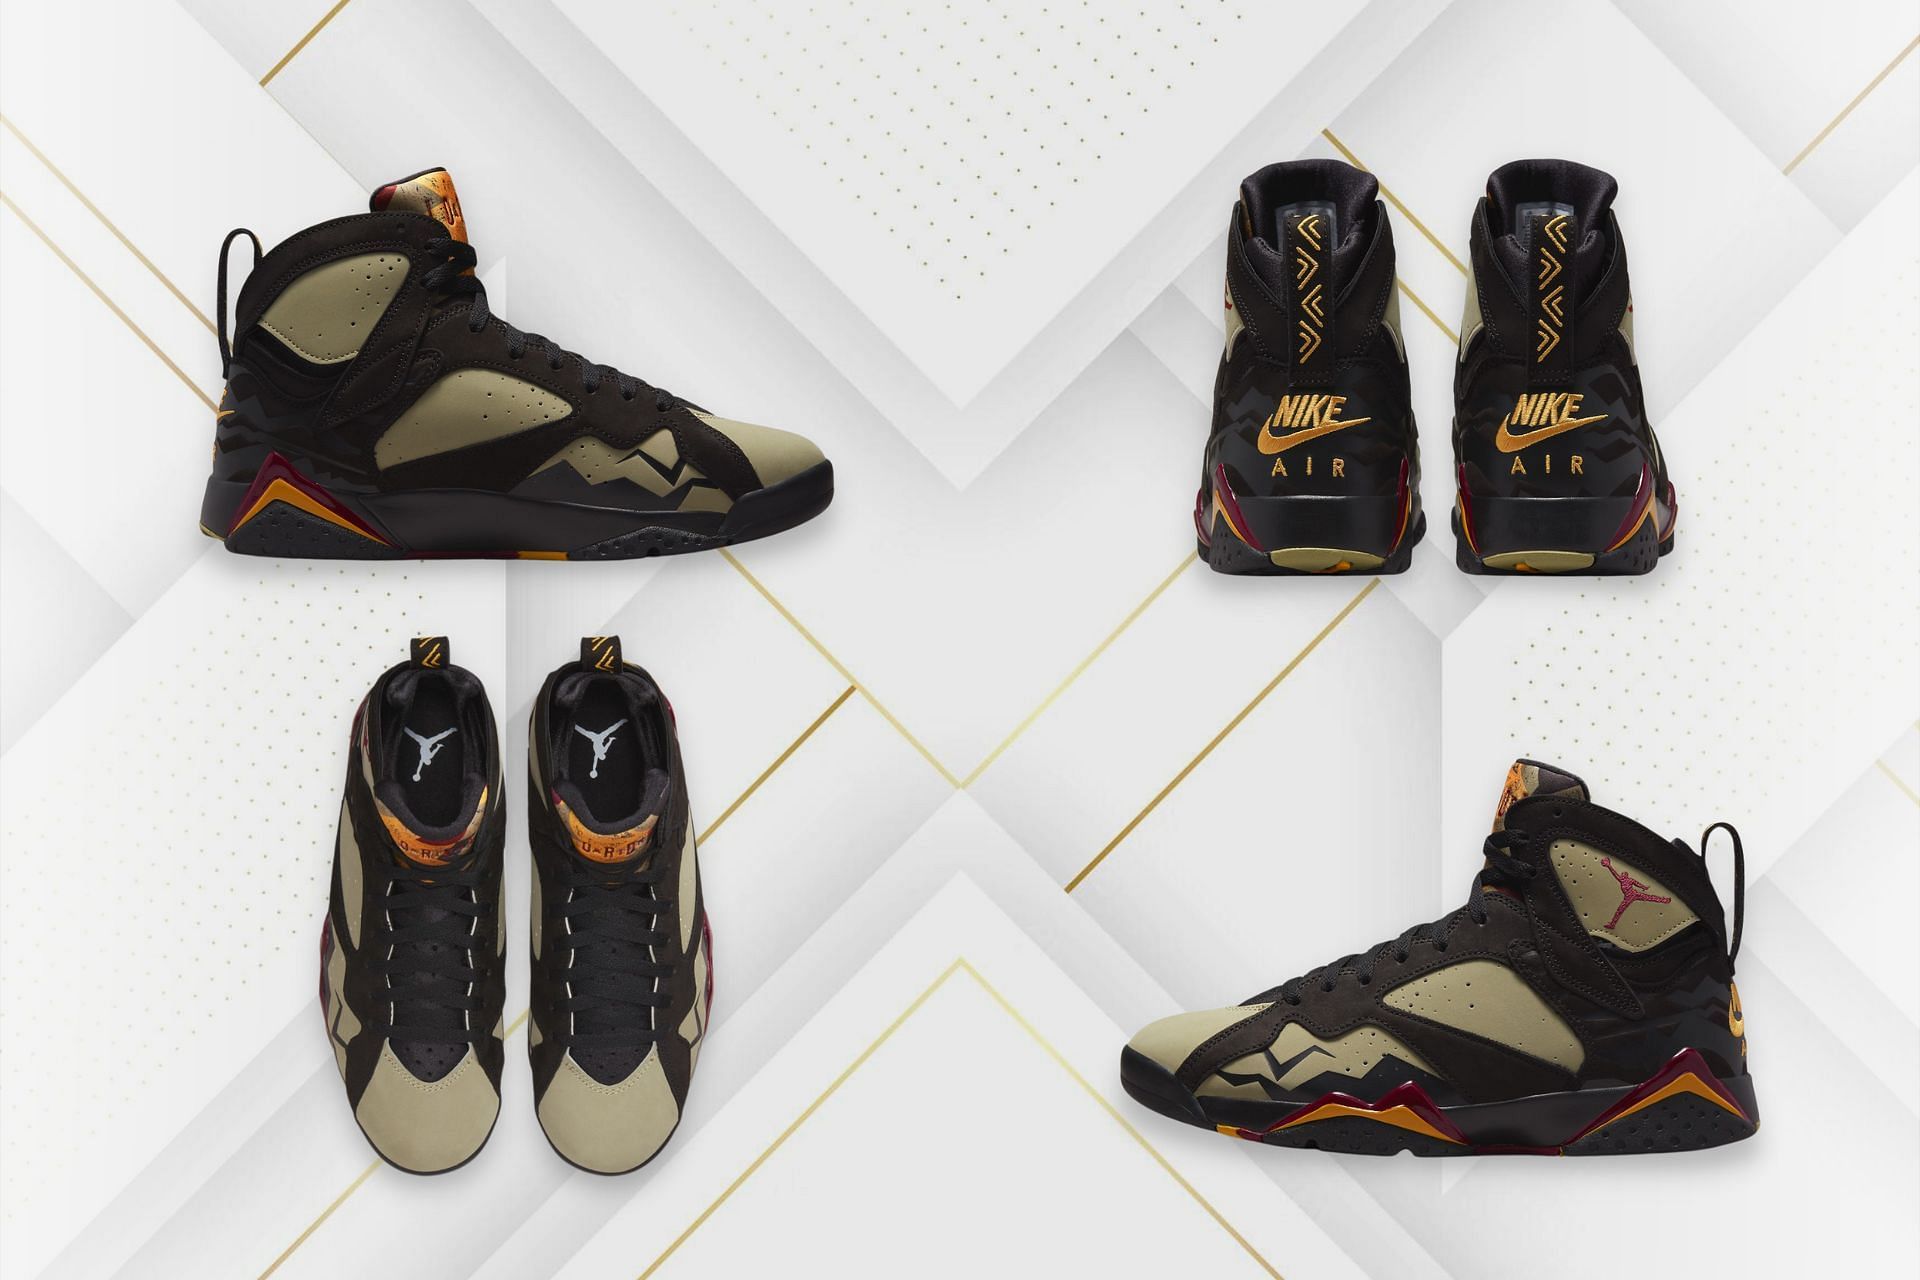 Upcoming Nike Air Jordan 7 &quot;Black Olive&quot; sneakers previously introduced as the &quot;Cherrywood&quot; to round up the 30th-anniversary celebrations (Image via Sportskeeda)